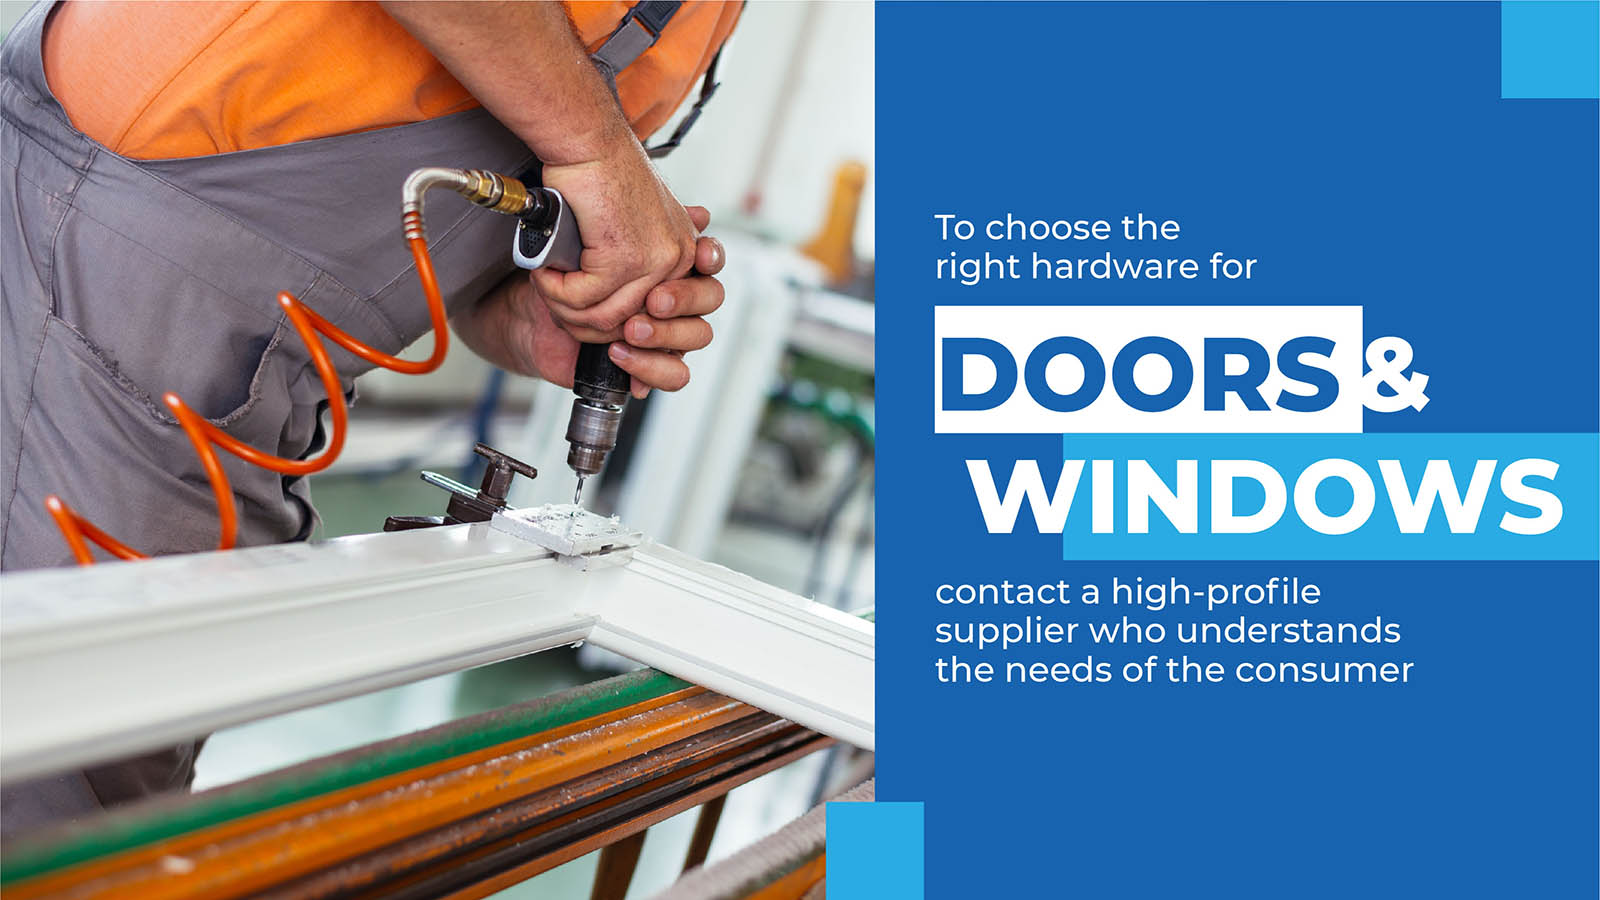 To choose the right hardware for doors and windows